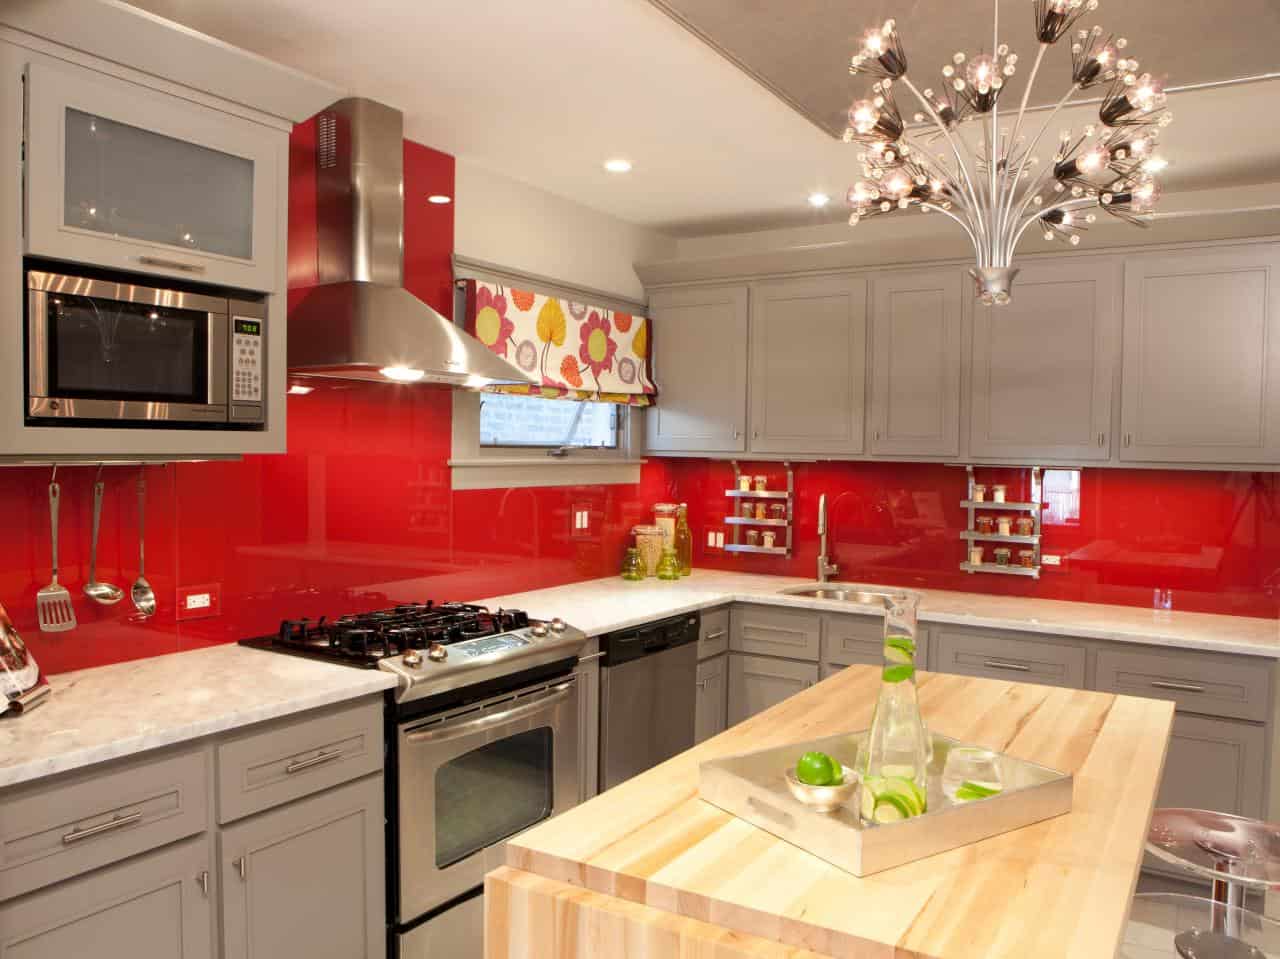 Tips to Update Your Kitchen on a Tight Budget - Paint